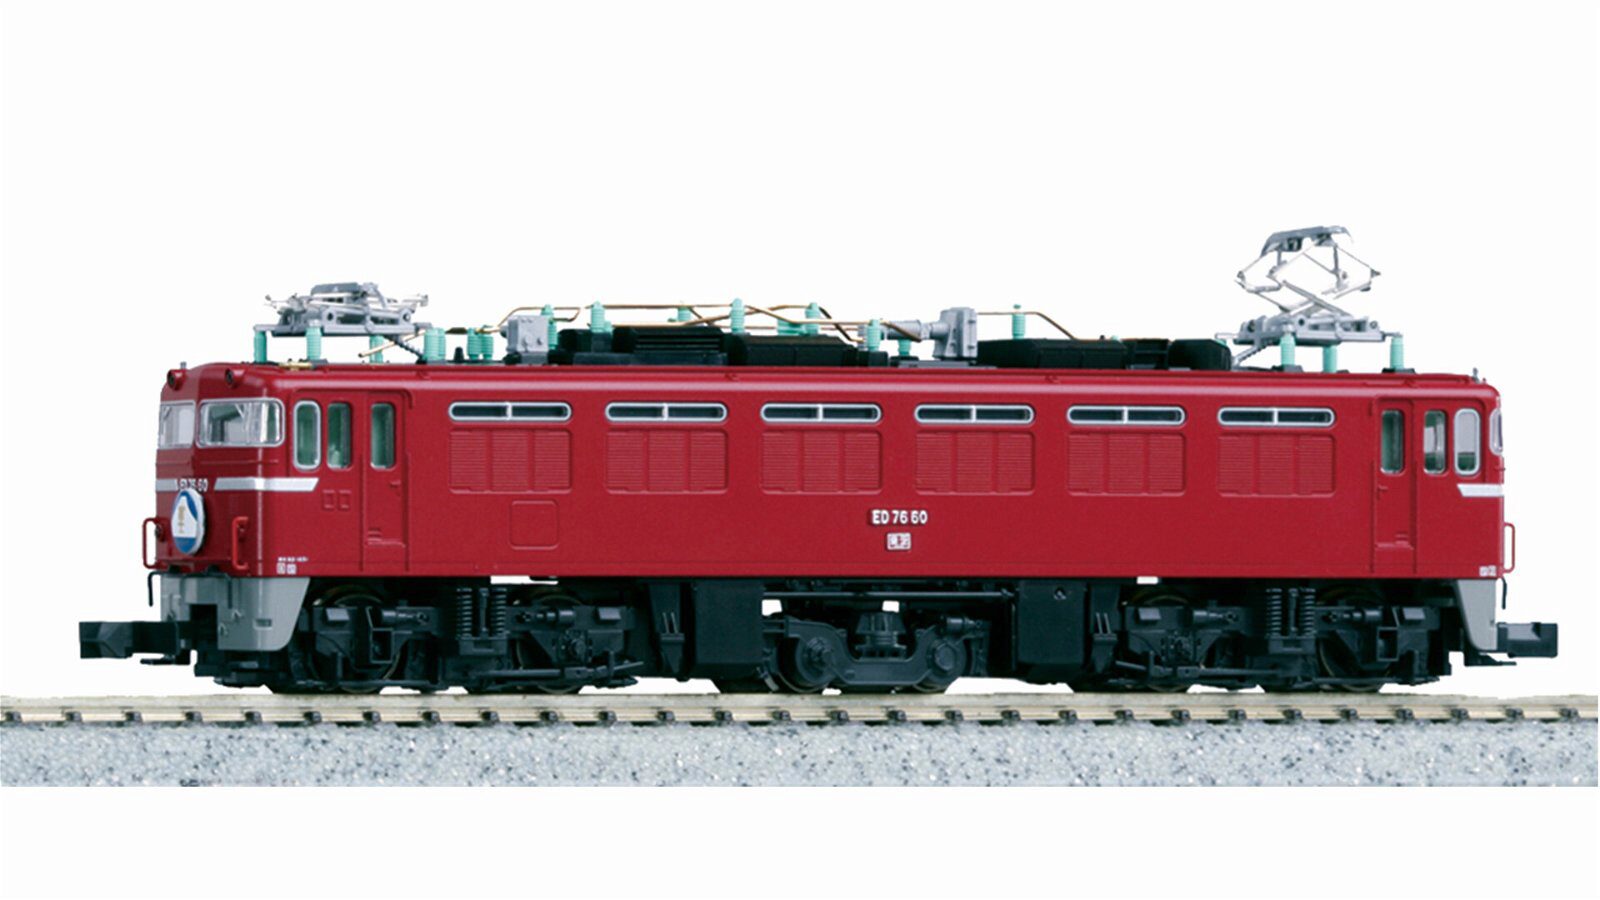 Kato 7030133 ED76 0 Late Stage JR Freigth Renewed Version